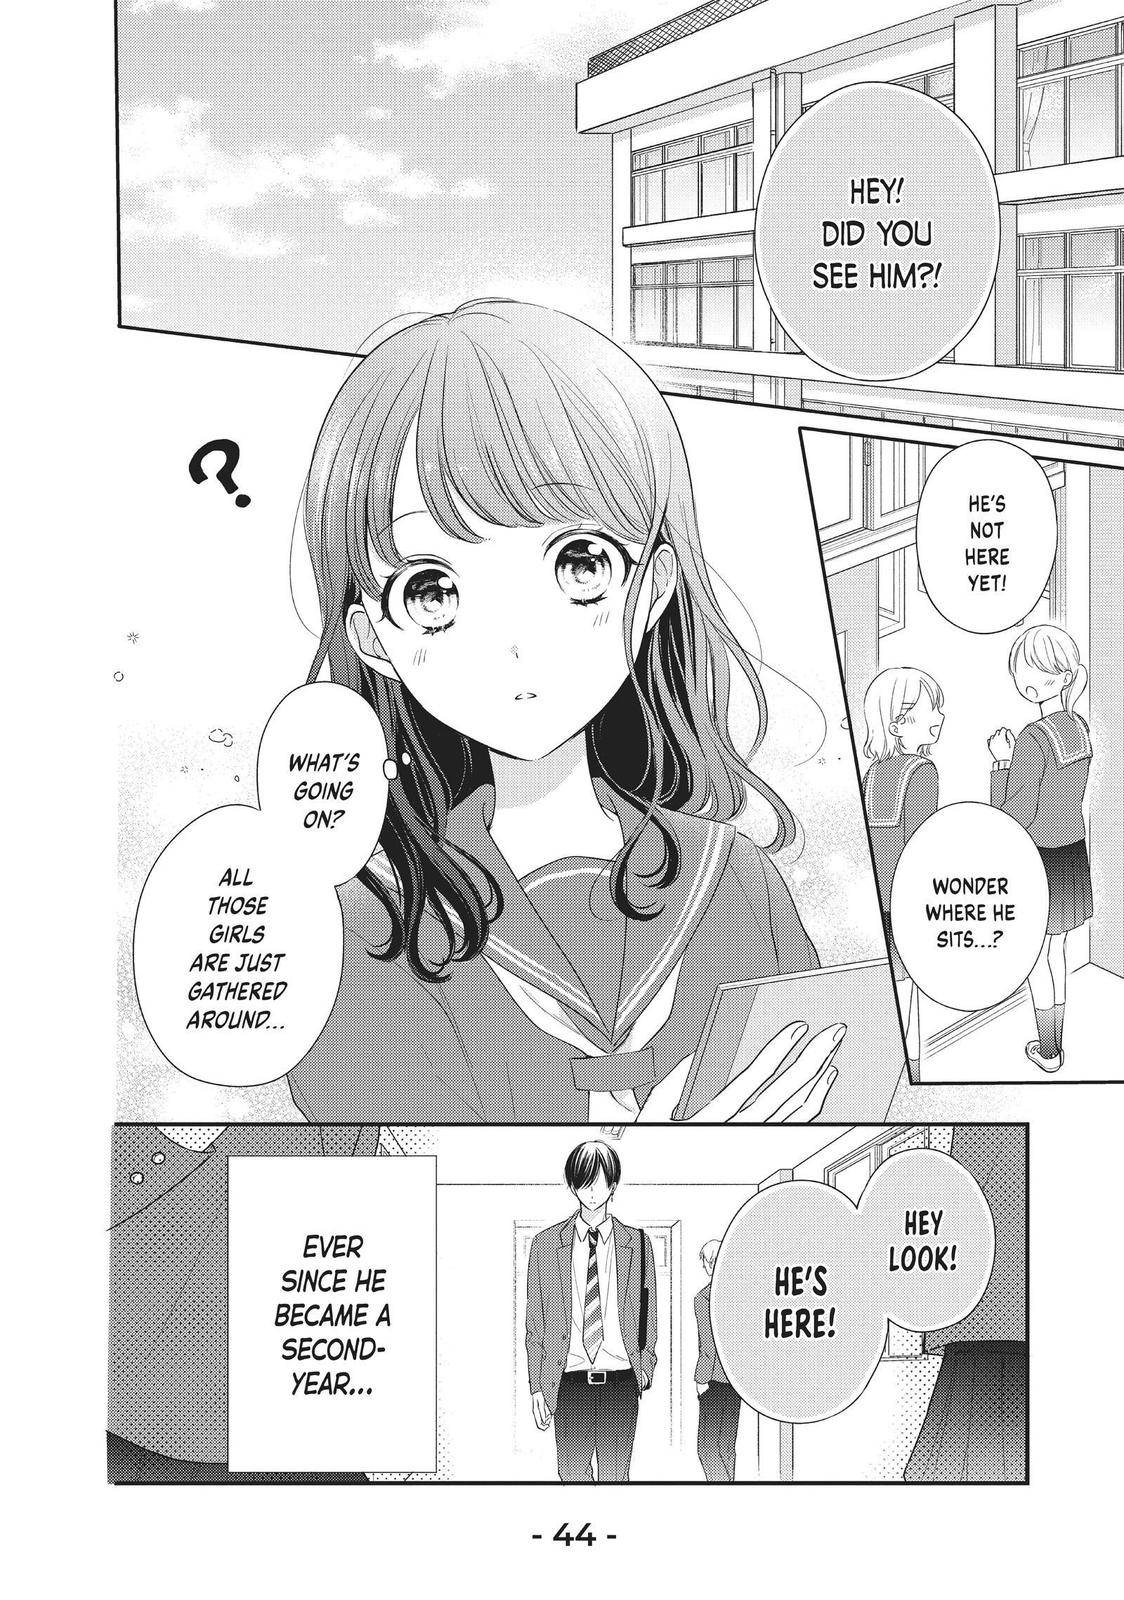 Chihiro-kun Only Has Eyes for Me - chapter 26 - #2